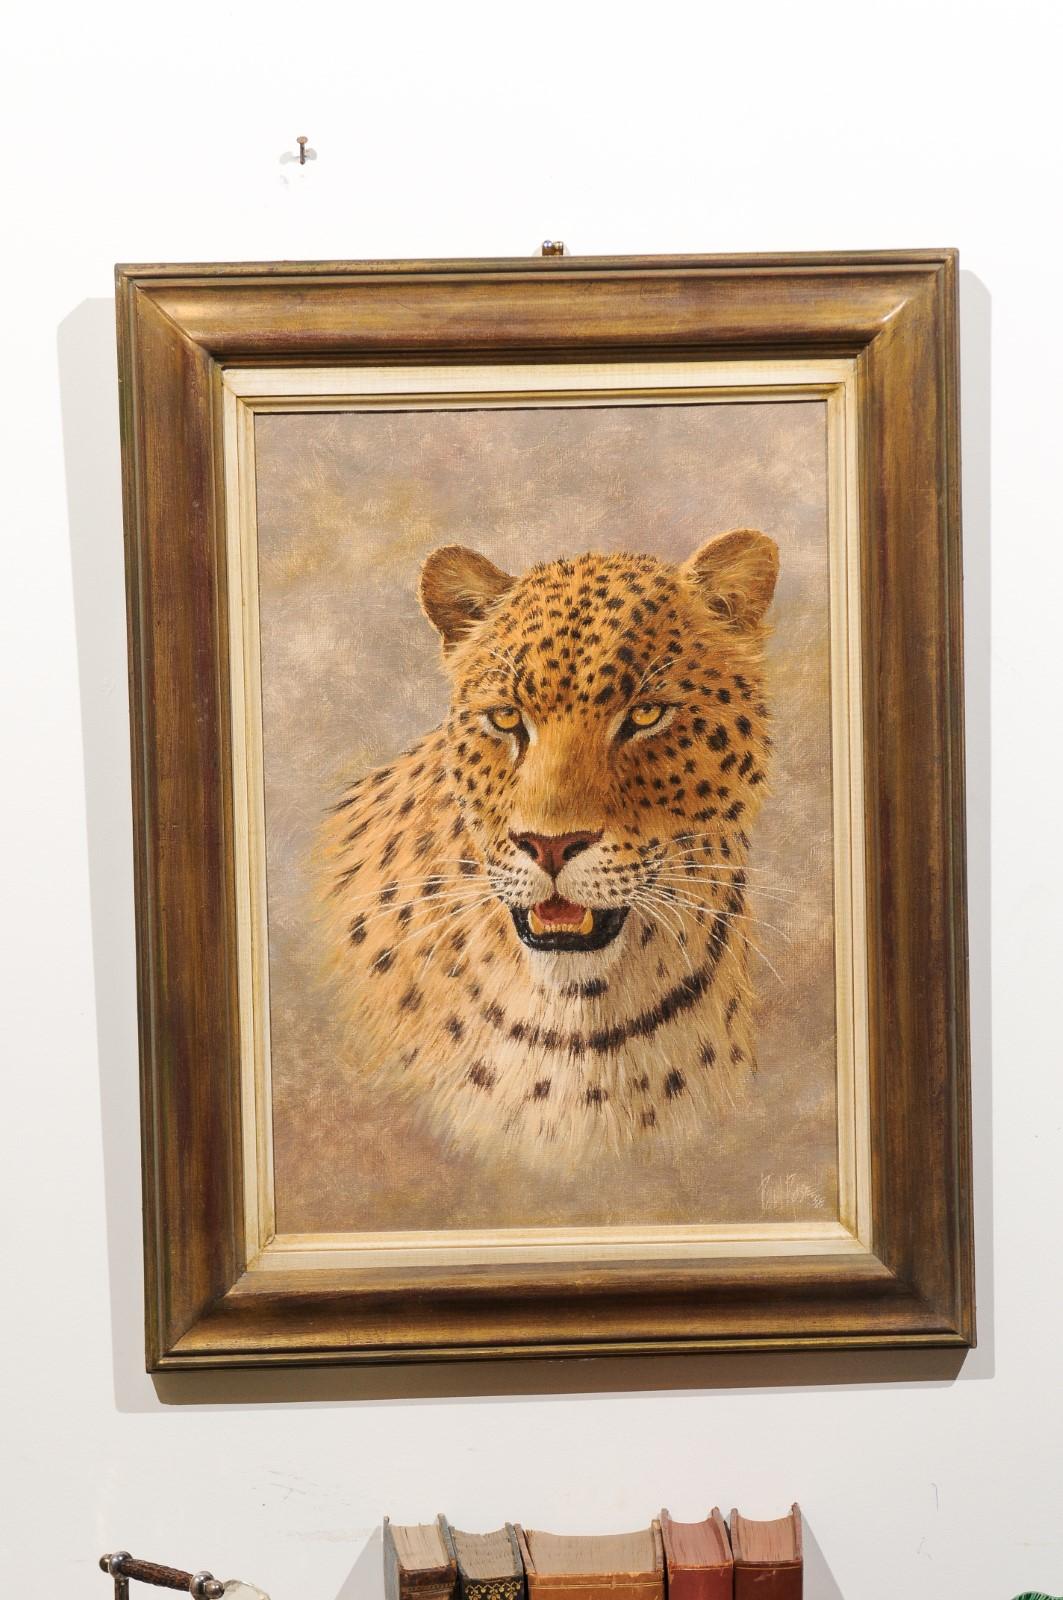 An original framed Paul Rose wildlife painting of vertical format from the late 20th century, depicting a leopard. We are holding our breath in front of this exquisite Paul Rose painting featuring a leopard who seems to be emerging from a delicate